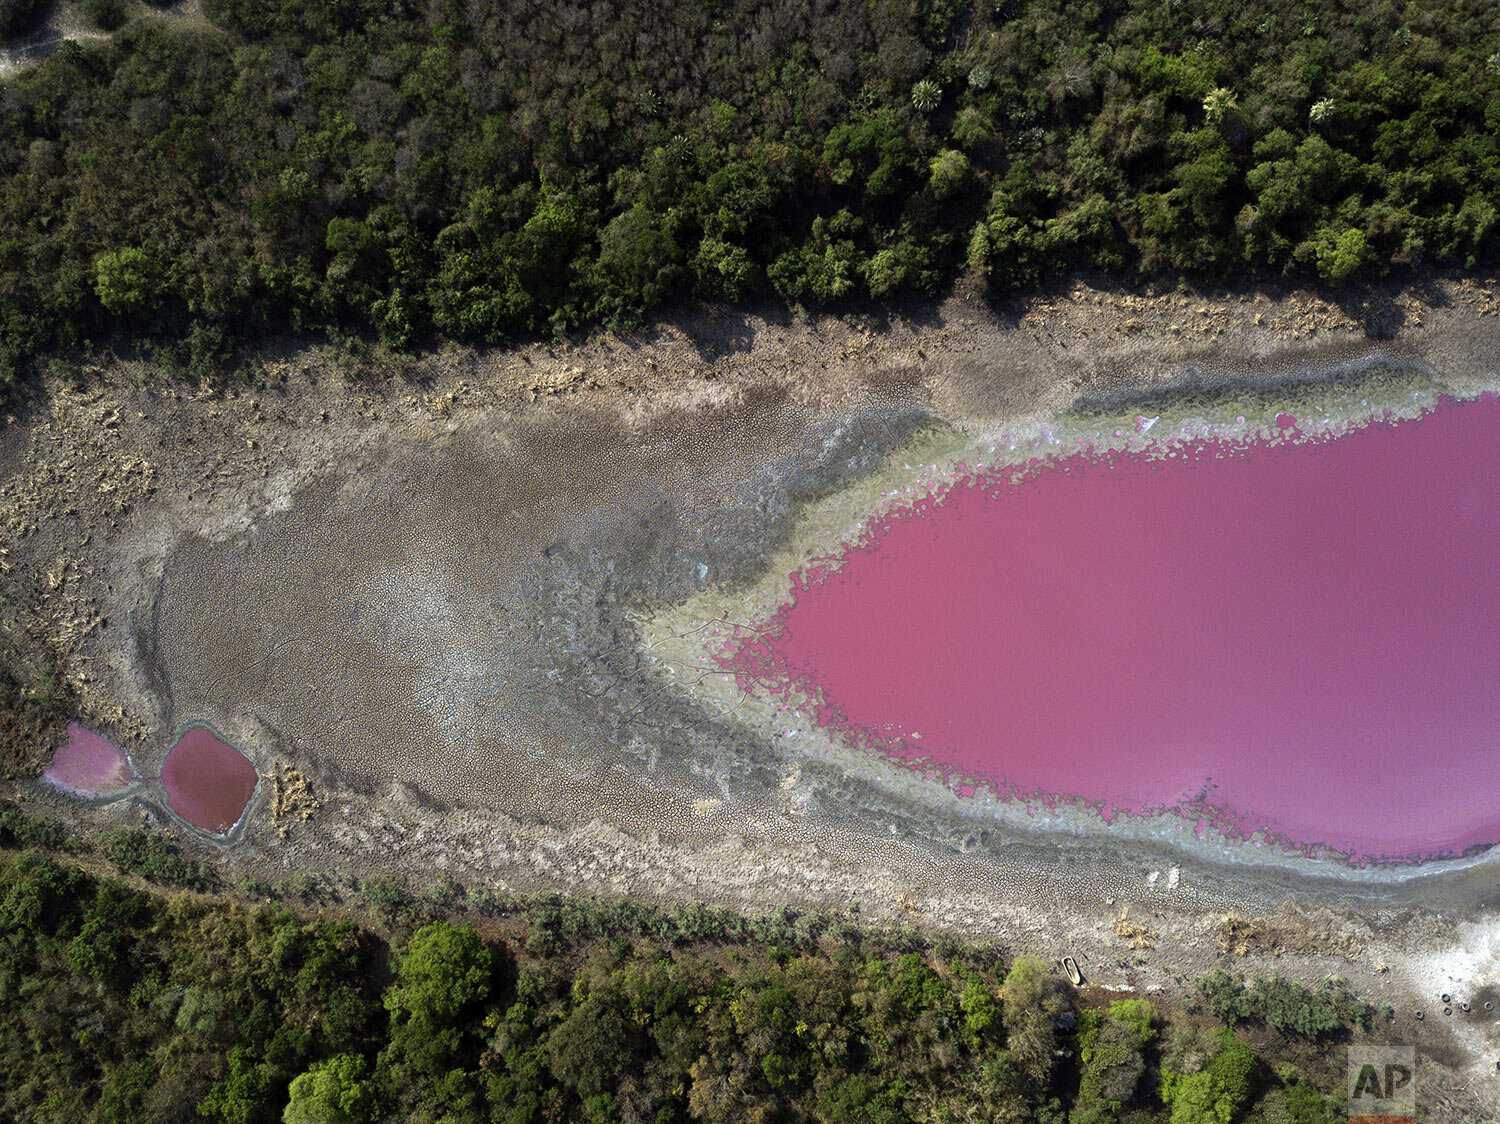  The bed of the Cerro Lagoon is dry and cracked from an extended drought, holding purple water due to untreated waste from a tannery company, in Limpio, which means "clean," Paraguay, Oct. 21, 2020. (AP Photo/Jorge Saenz) 